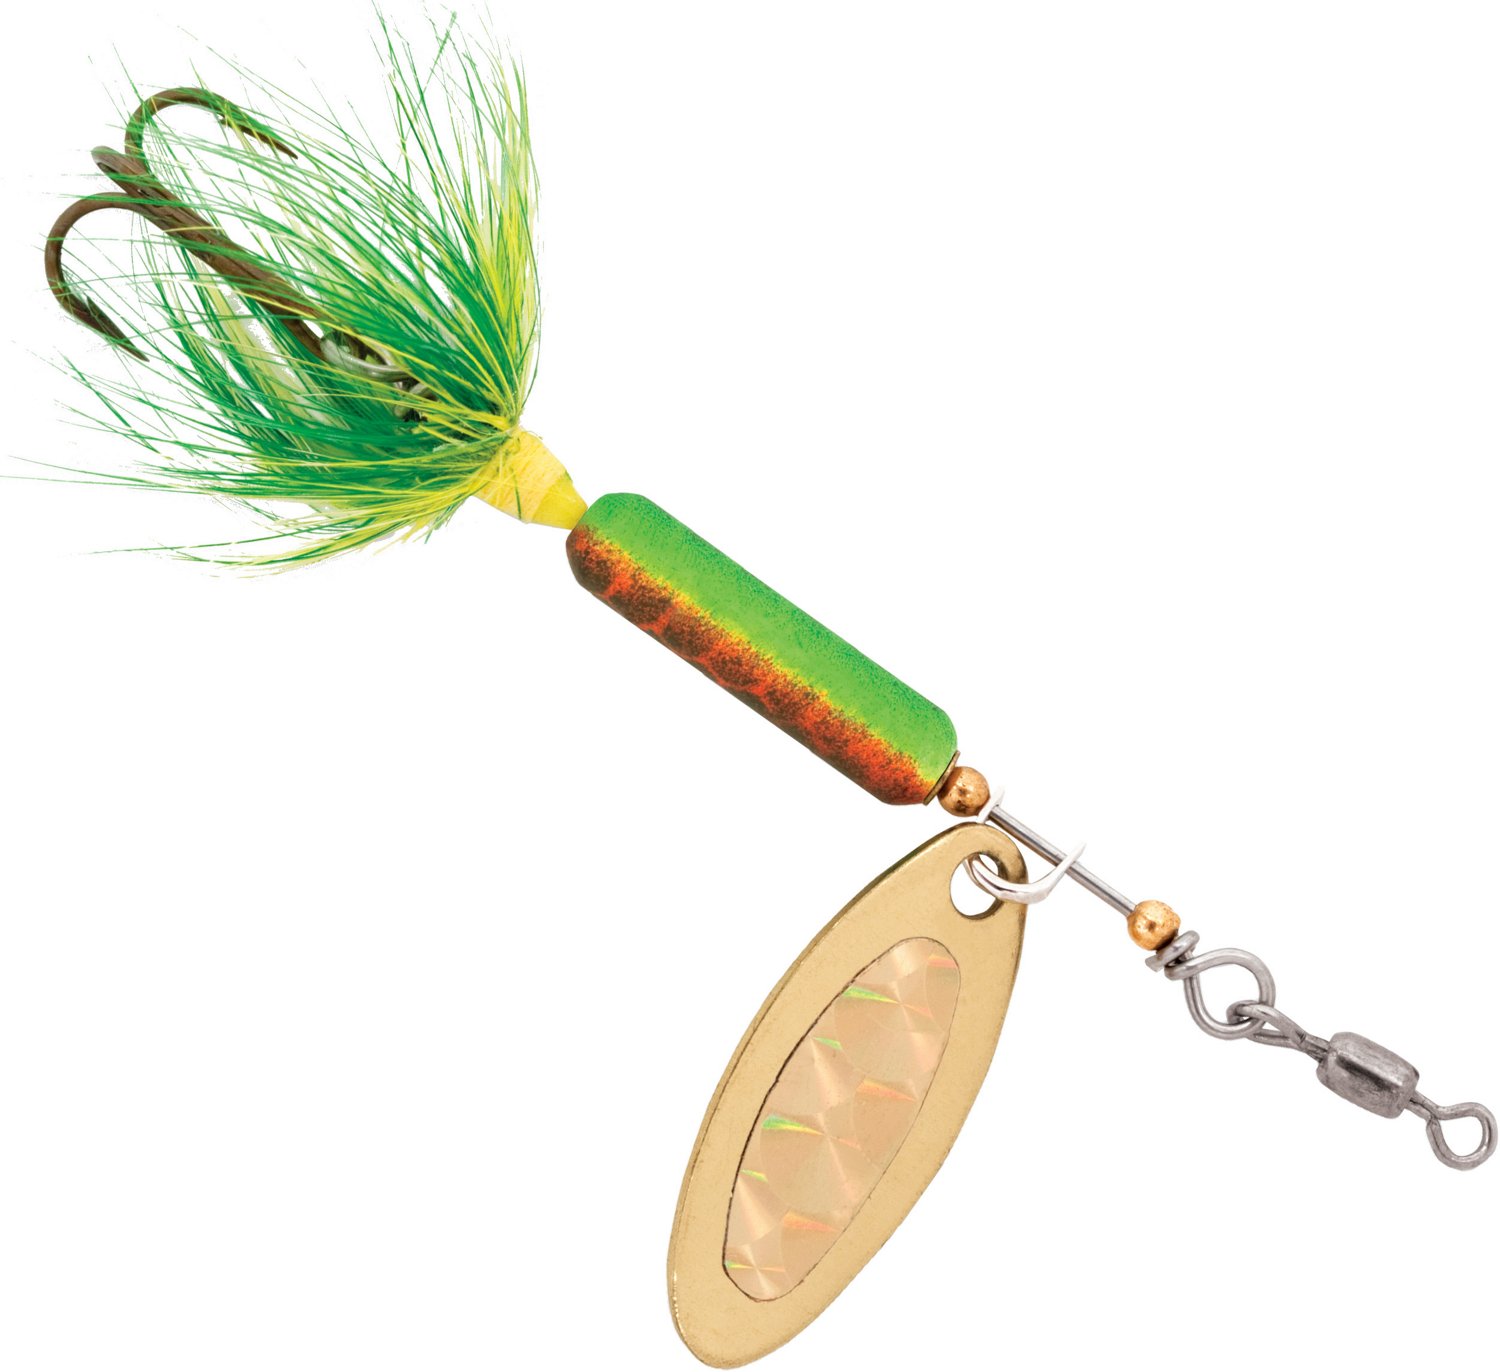 Academy Sports + Outdoors Rapala® Bang Tail 1/2 oz. Spinnerbait